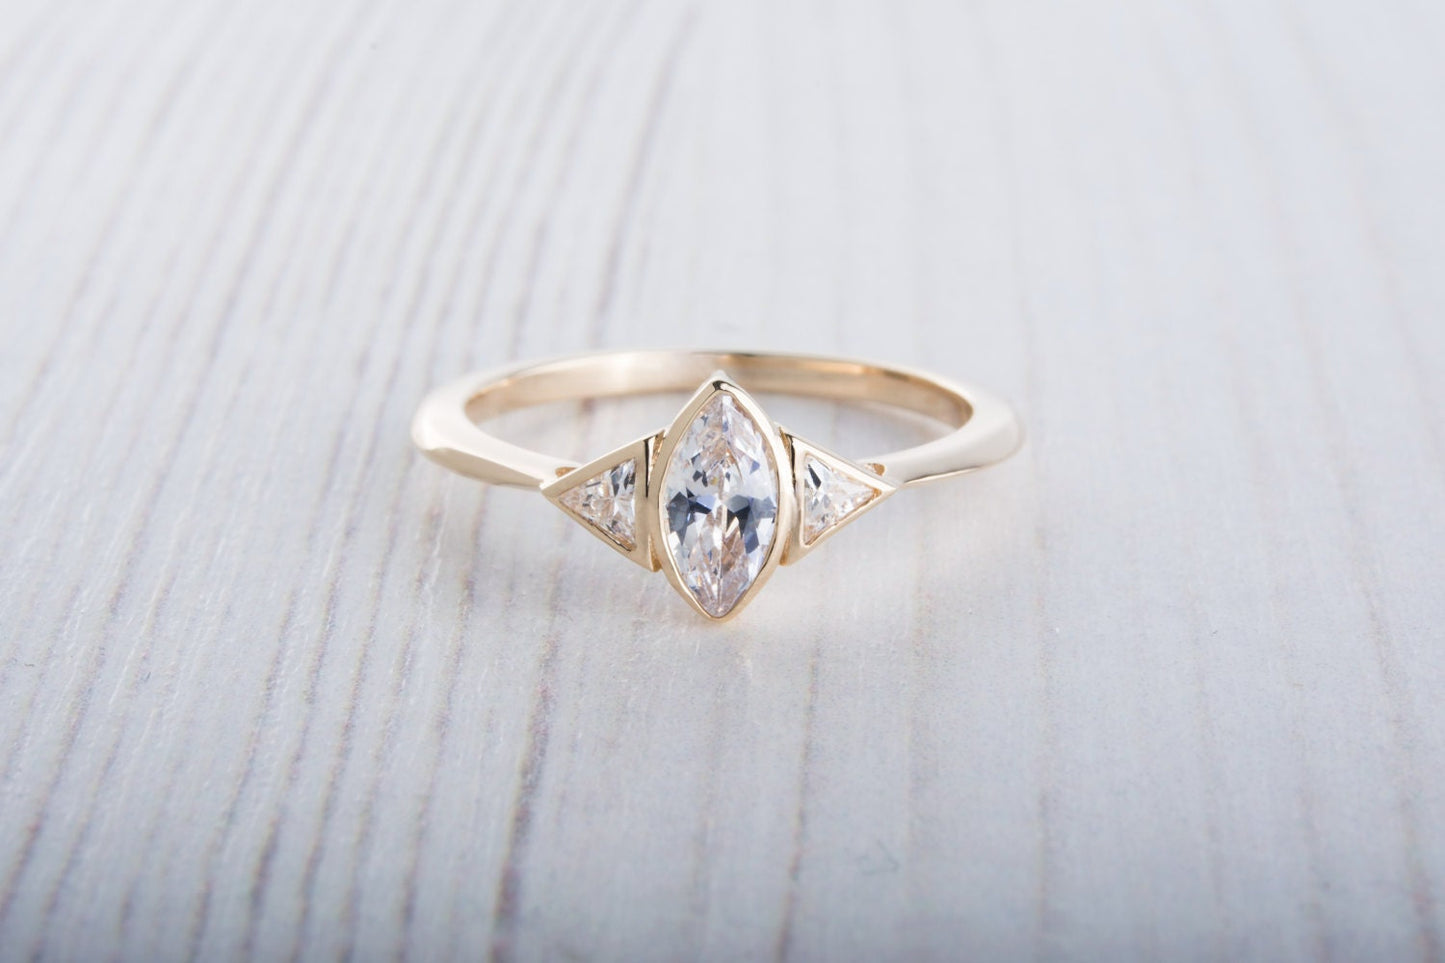 ON SALE!! Solid 10ct Yellow gold ring with Marquise and Trillion cut Man Made Diamond Simulants - handmade engagement ring